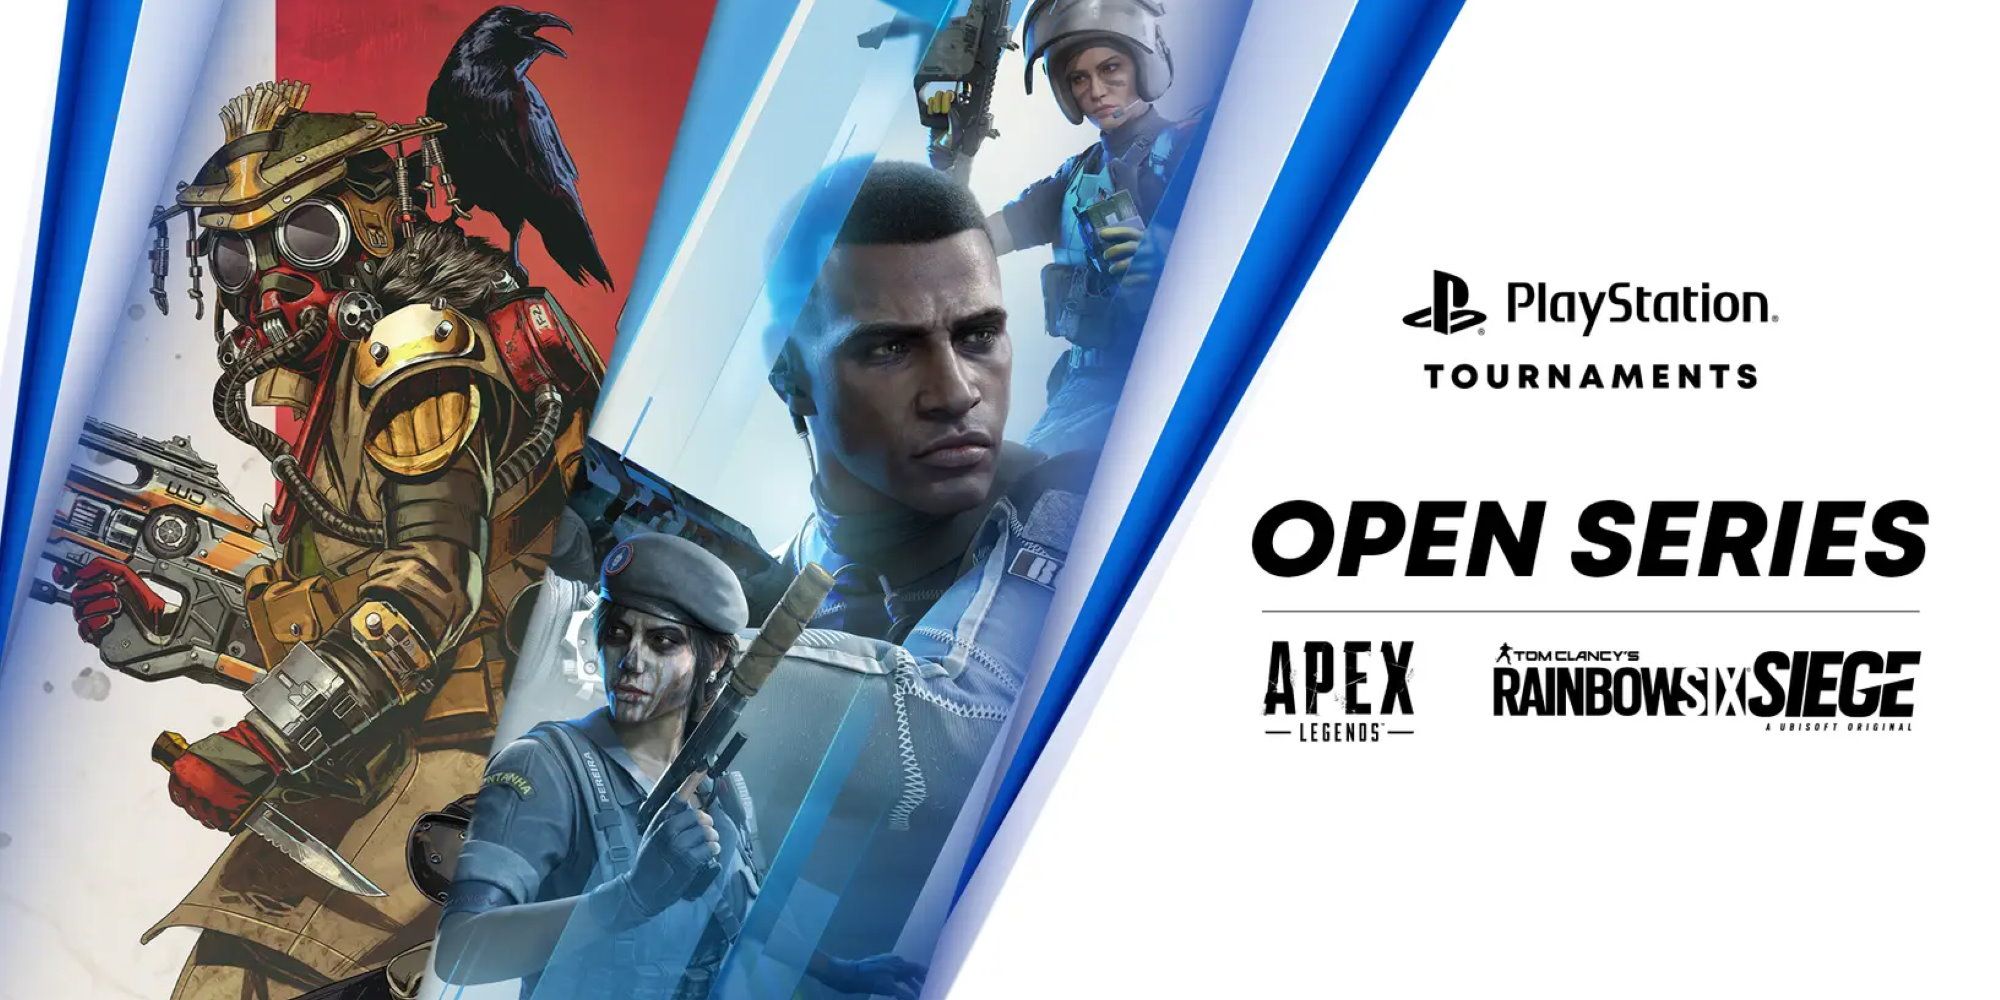 Apex Legends, Rainbow Six Siege Officially Join PlayStation Tournaments Open Series